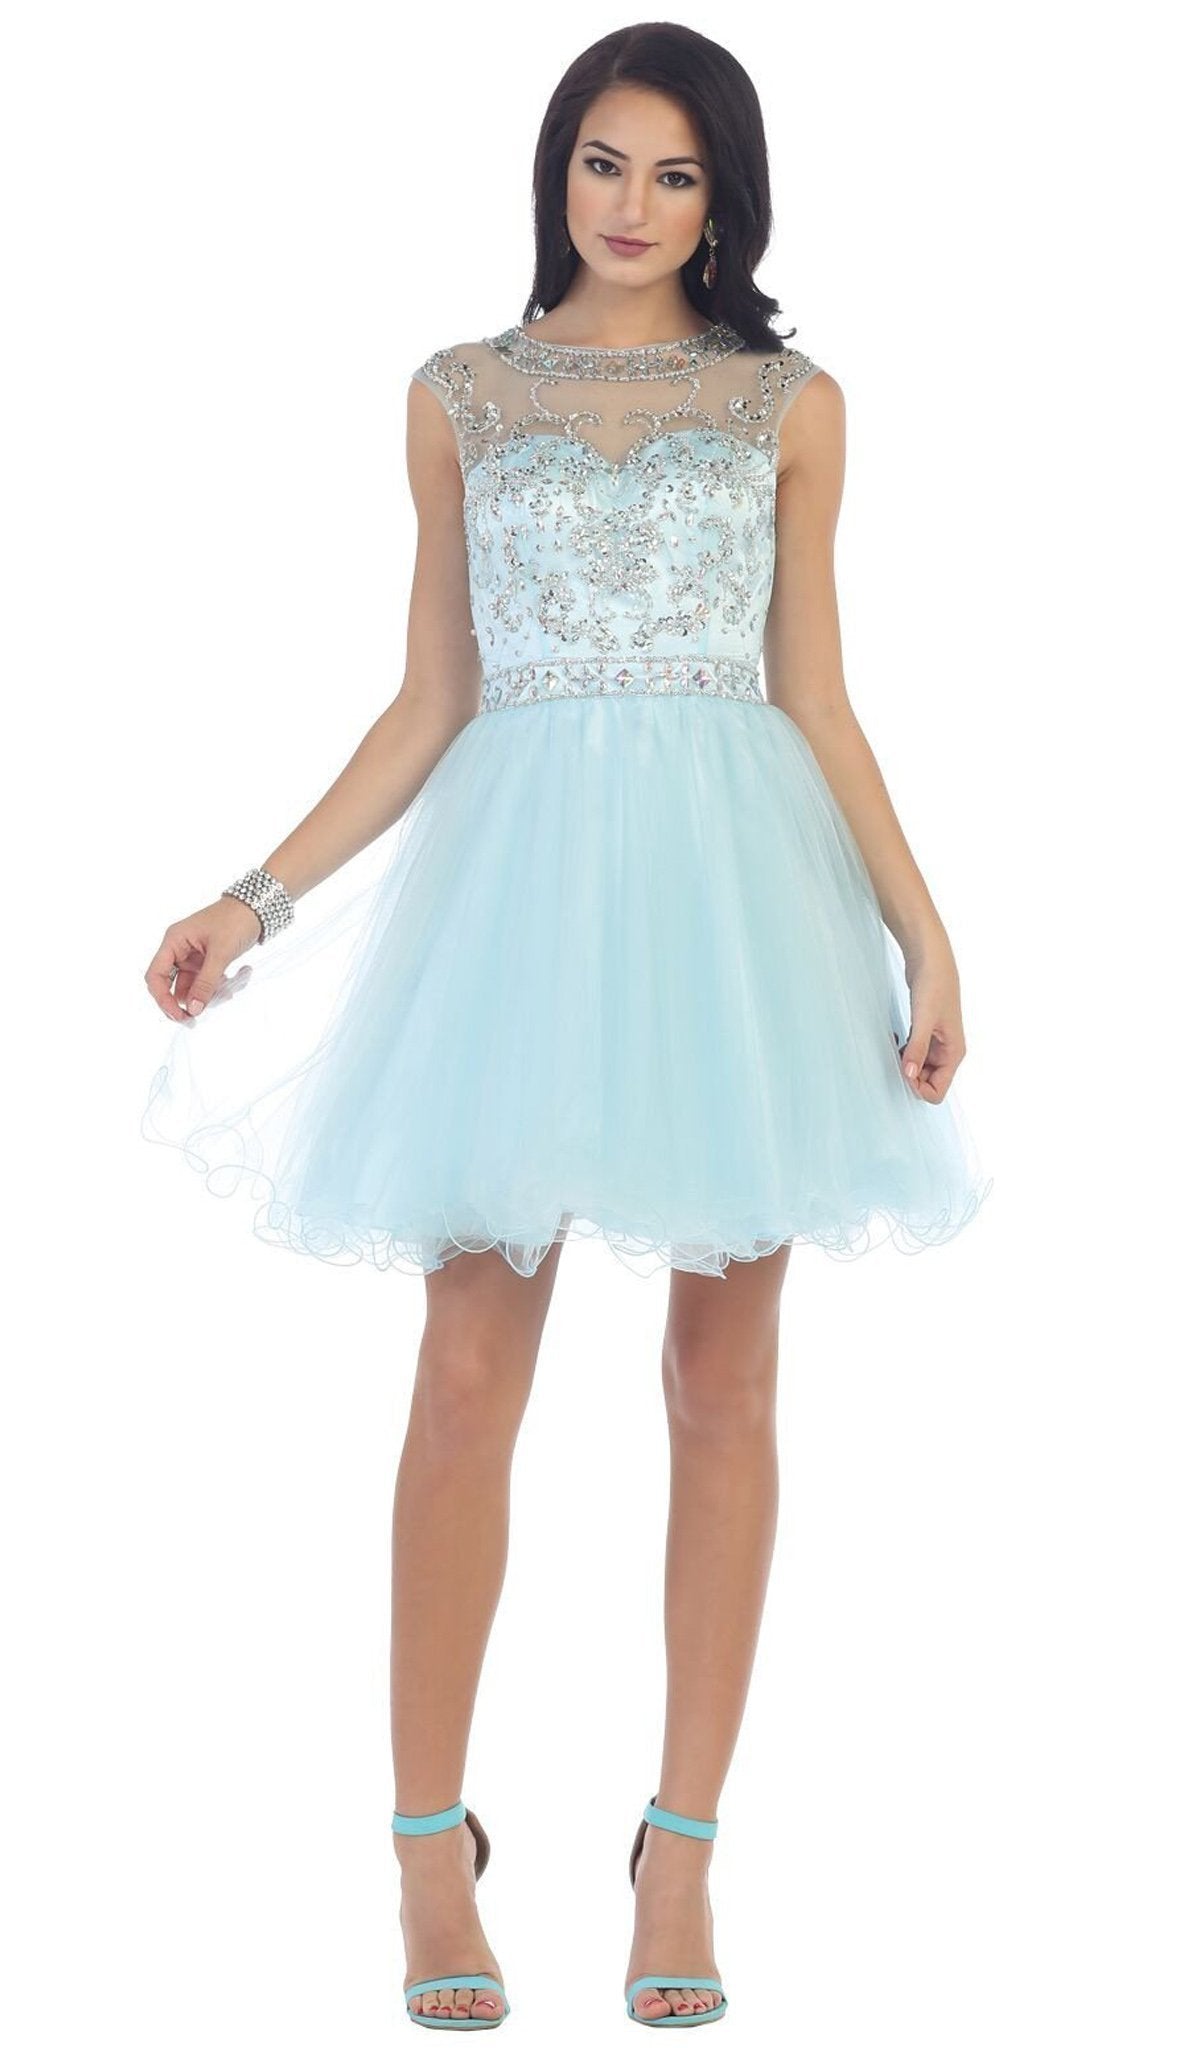 May Queen - Beaded Illusion Tulle Cocktail Dress Special Occasion Dress 4 / Aqua